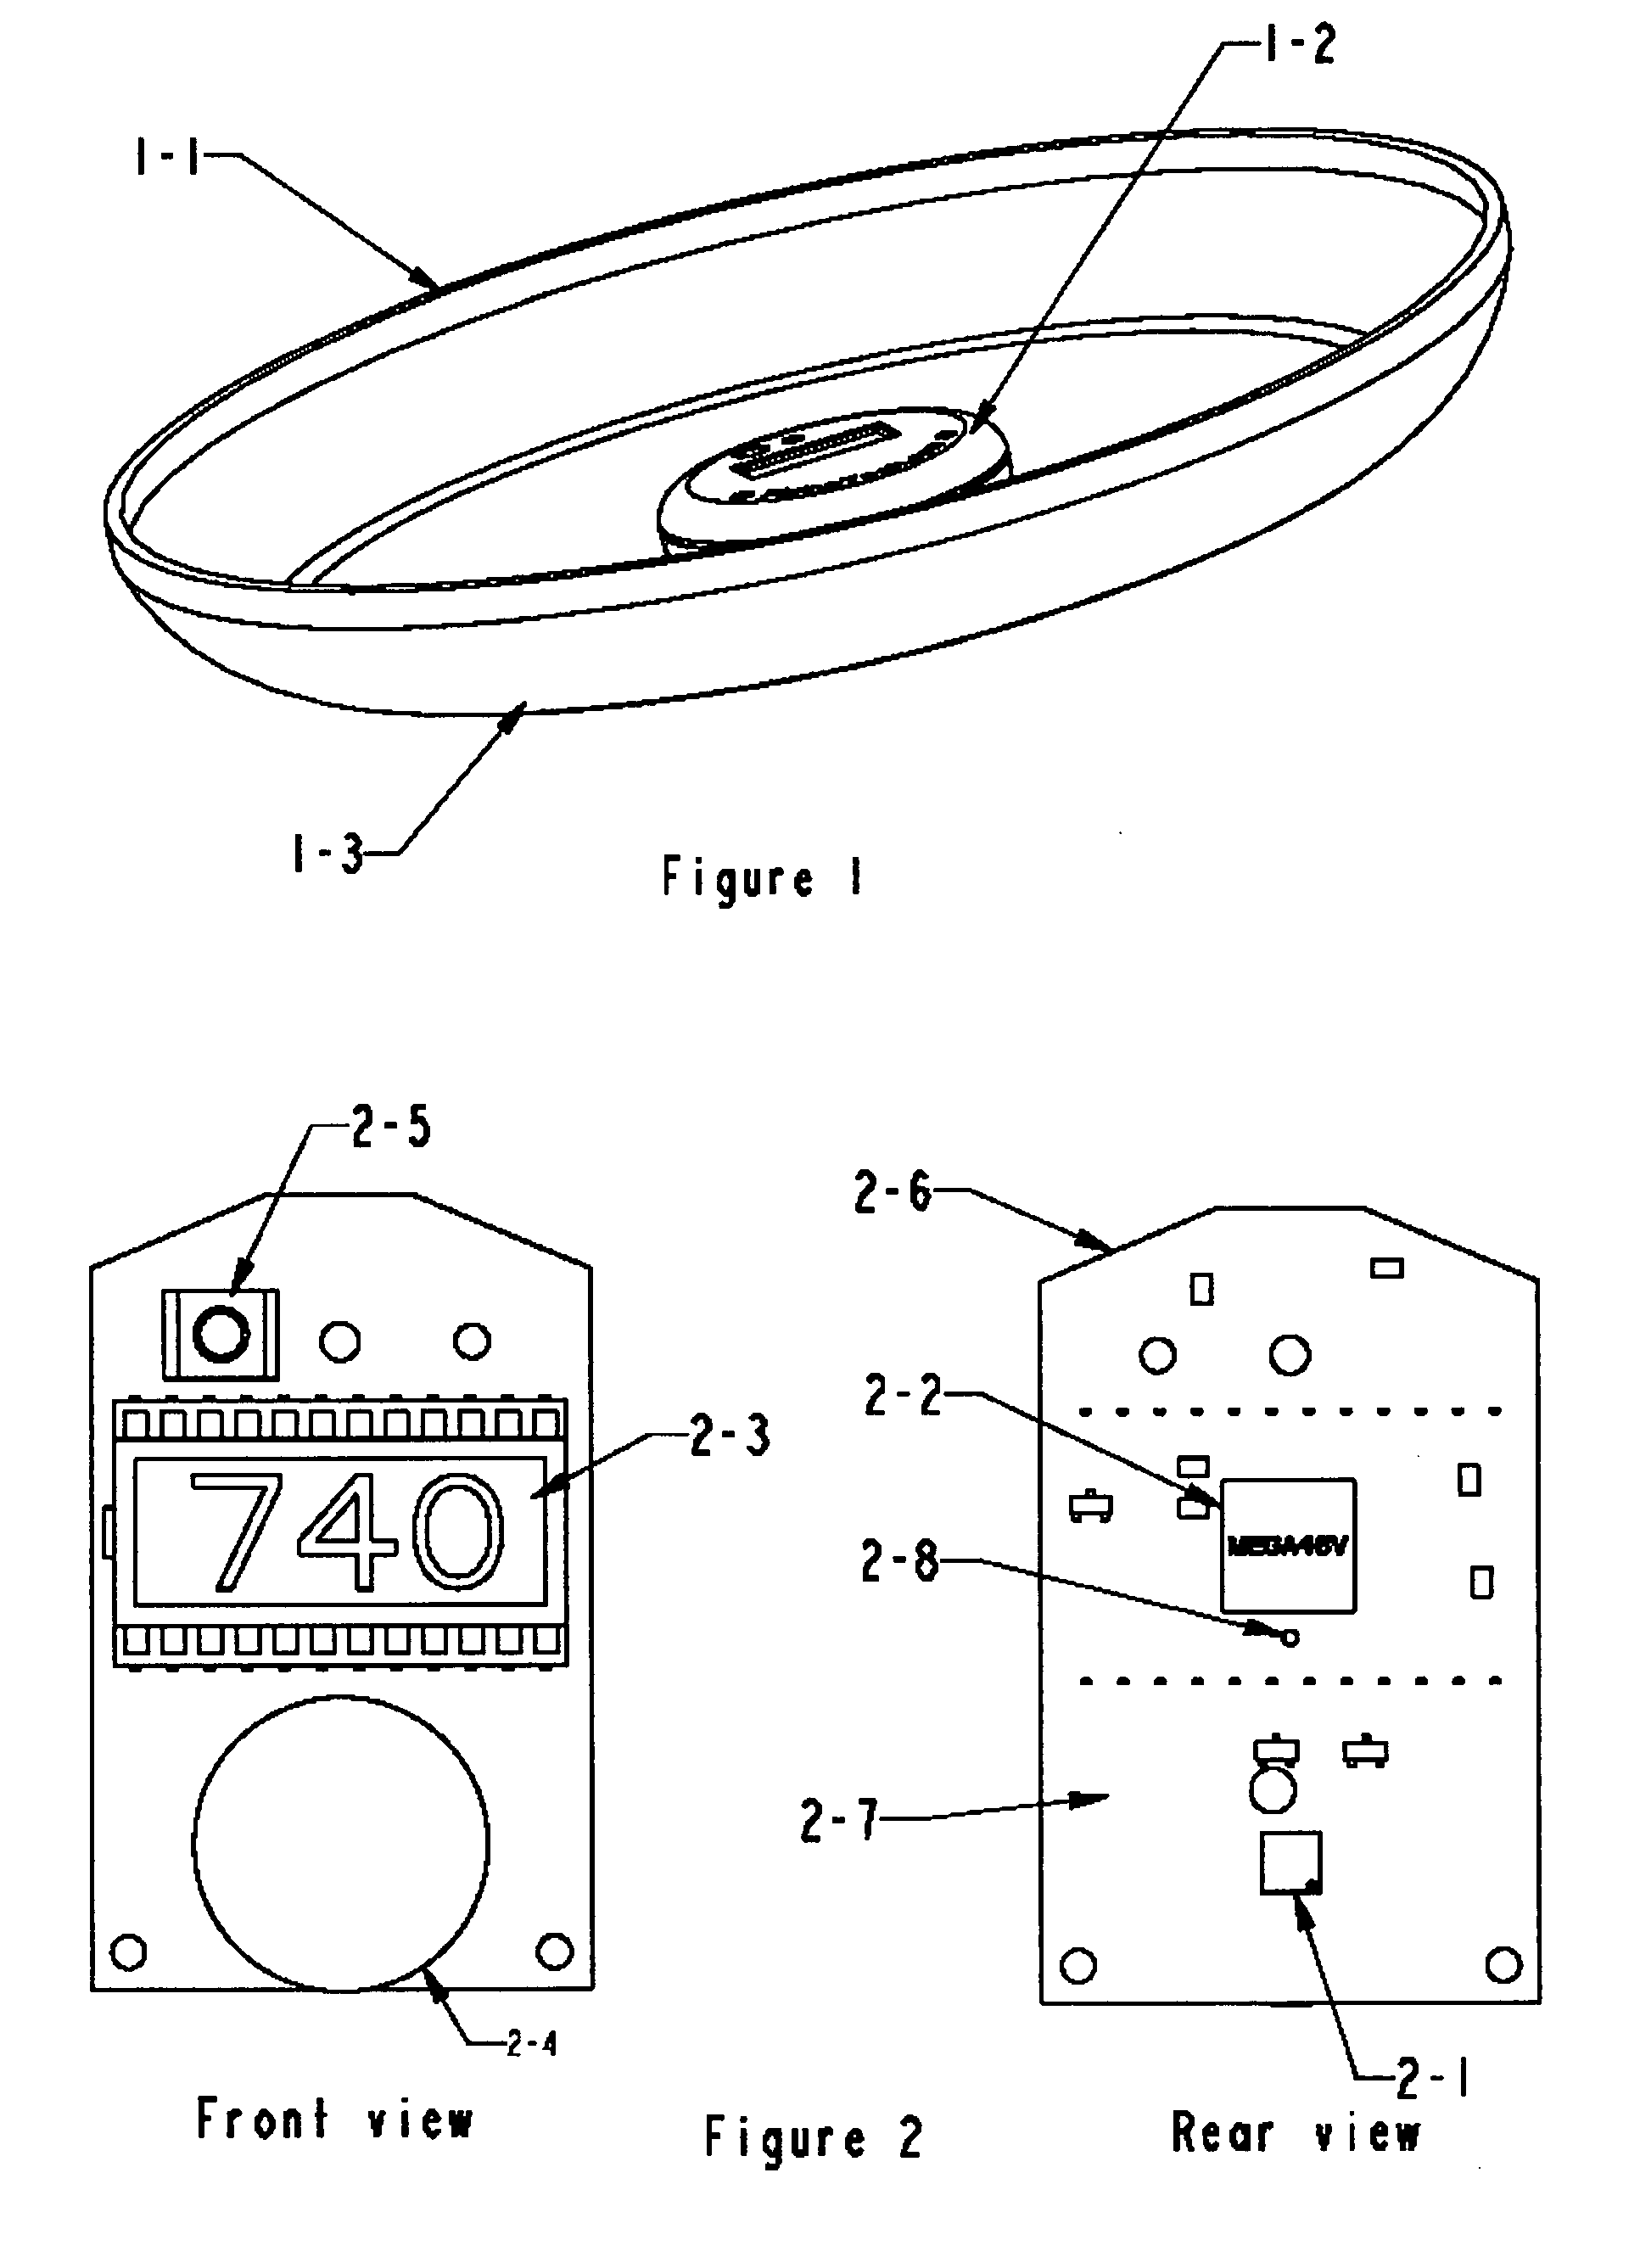 Flying disc training device